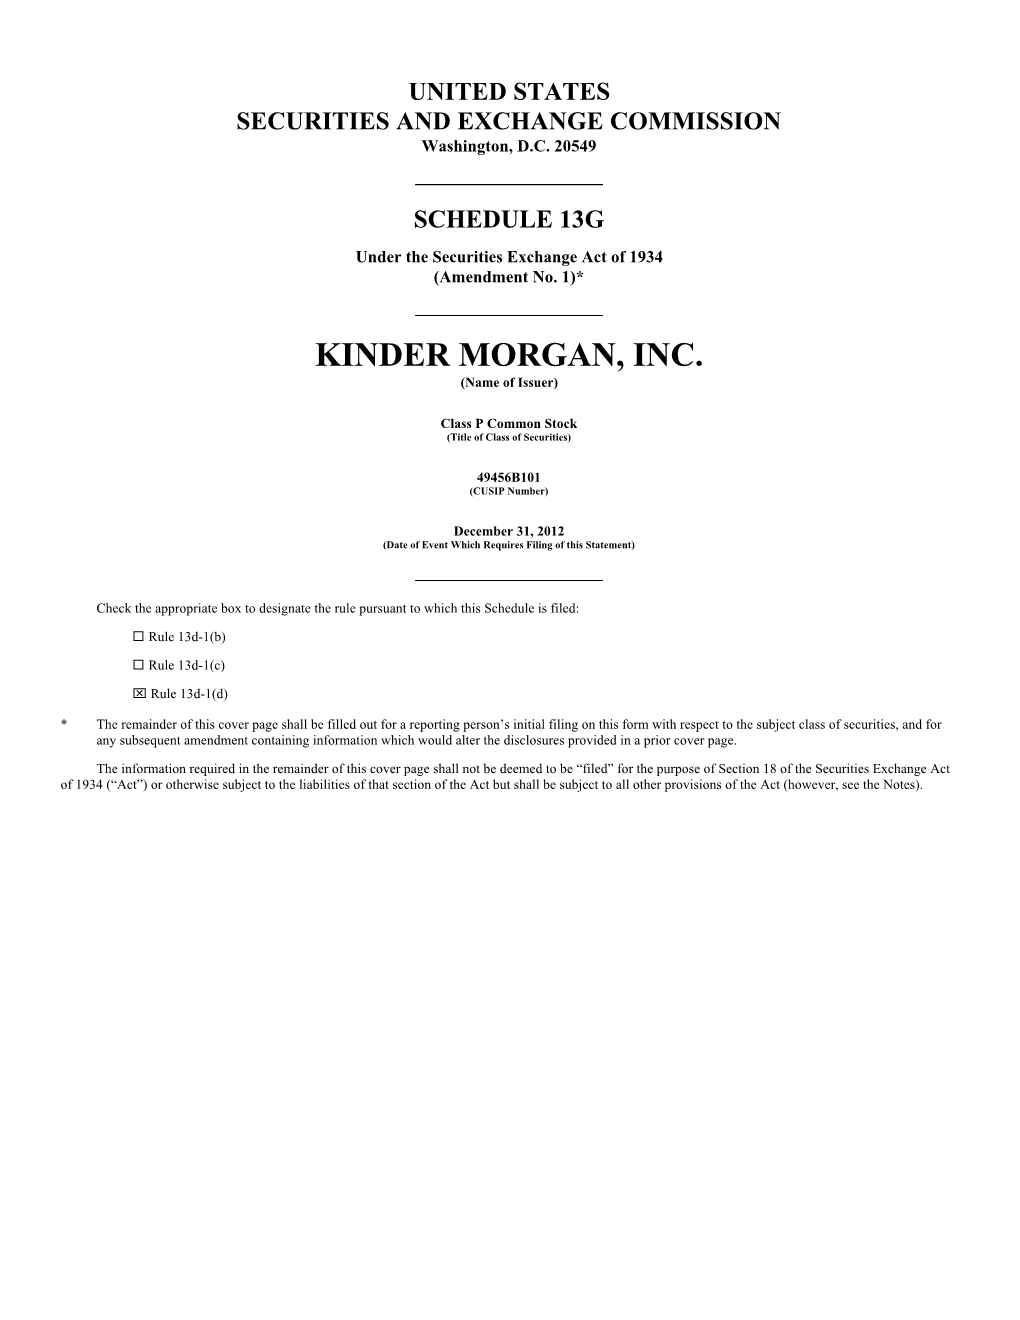 KINDER MORGAN, INC. (Name of Issuer)